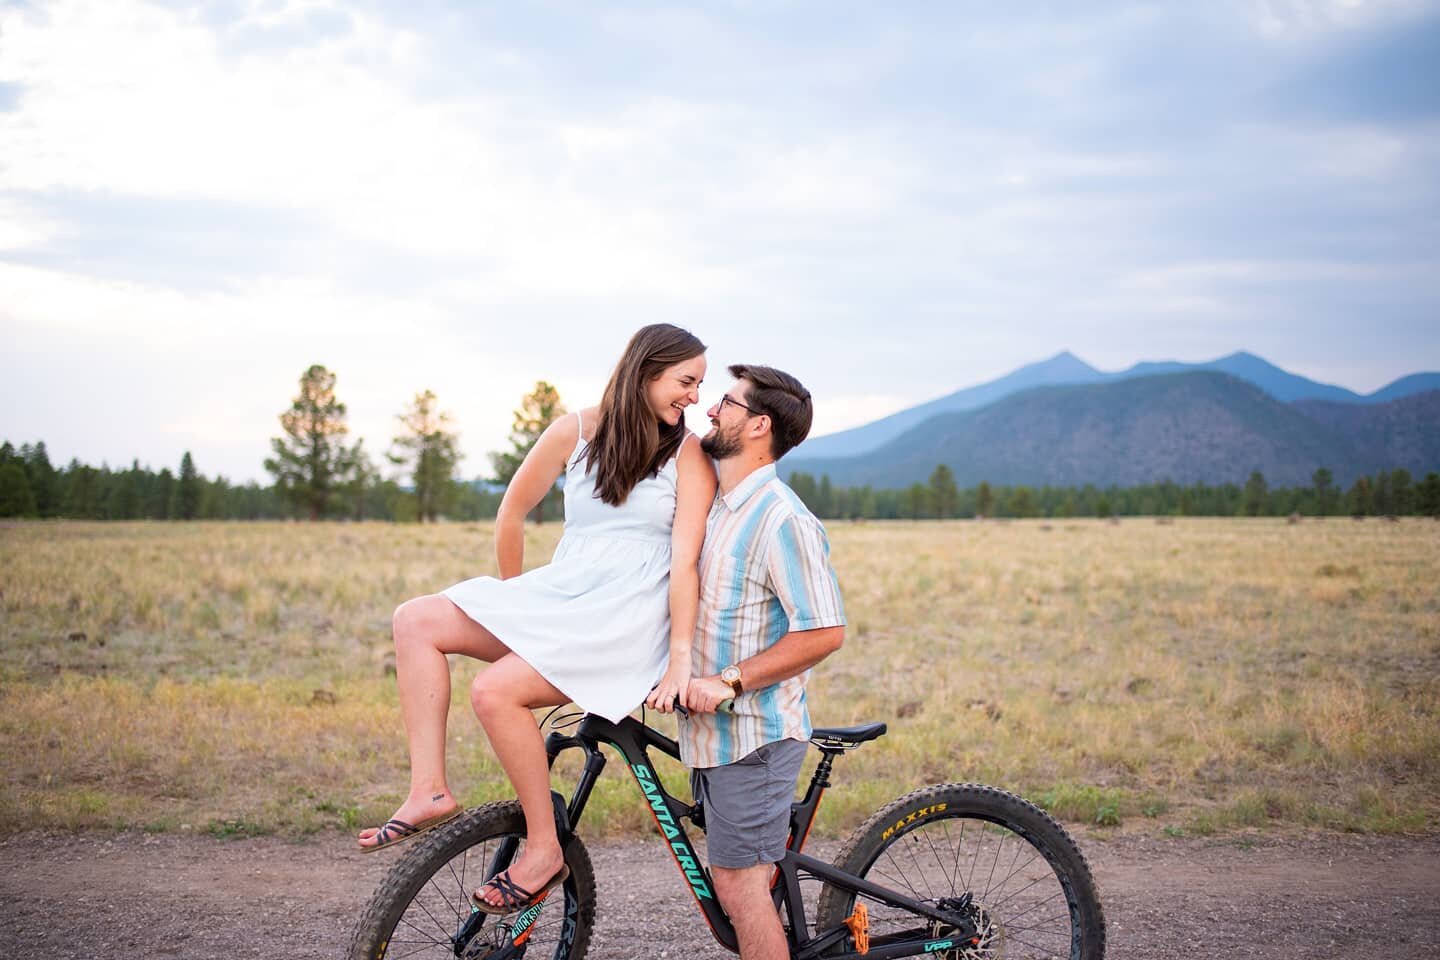 I locked my bike to yours
&bull;
McKenzie &amp; Conner wanted to highlight a significant hobby in their lives - mountain biking! he's a long-term aficionado &amp; finally convinced her to take up this shared leisure activity during quarantine. 
it wa